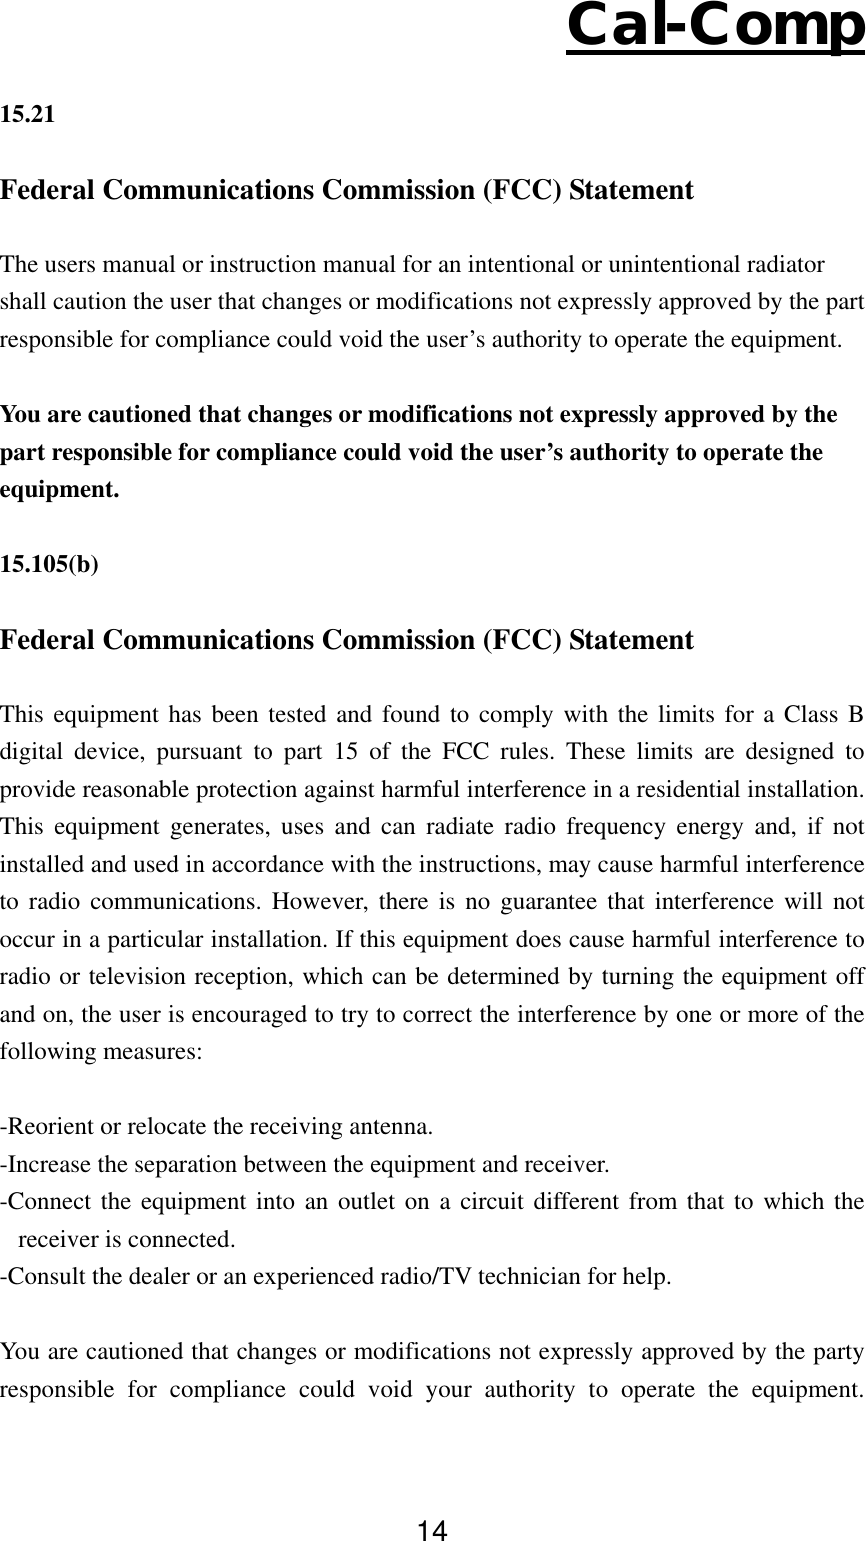 Cal-Comp 14  15.21  Federal Communications Commission (FCC) Statement  The users manual or instruction manual for an intentional or unintentional radiator shall caution the user that changes or modifications not expressly approved by the part responsible for compliance could void the user’s authority to operate the equipment.  You are cautioned that changes or modifications not expressly approved by the part responsible for compliance could void the user’s authority to operate the equipment.  15.105(b)  Federal Communications Commission (FCC) Statement  This equipment has been tested and found to comply with the limits for a Class B digital device, pursuant to part 15 of the FCC rules. These limits are designed to provide reasonable protection against harmful interference in a residential installation. This equipment generates, uses and can radiate radio frequency energy and, if not installed and used in accordance with the instructions, may cause harmful interference to radio communications. However, there is no guarantee that interference will not occur in a particular installation. If this equipment does cause harmful interference to radio or television reception, which can be determined by turning the equipment off and on, the user is encouraged to try to correct the interference by one or more of the following measures:  -Reorient or relocate the receiving antenna. -Increase the separation between the equipment and receiver. -Connect the equipment into an outlet on a circuit different from that to which the receiver is connected. -Consult the dealer or an experienced radio/TV technician for help.  You are cautioned that changes or modifications not expressly approved by the party responsible for compliance could void your authority to operate the equipment. 